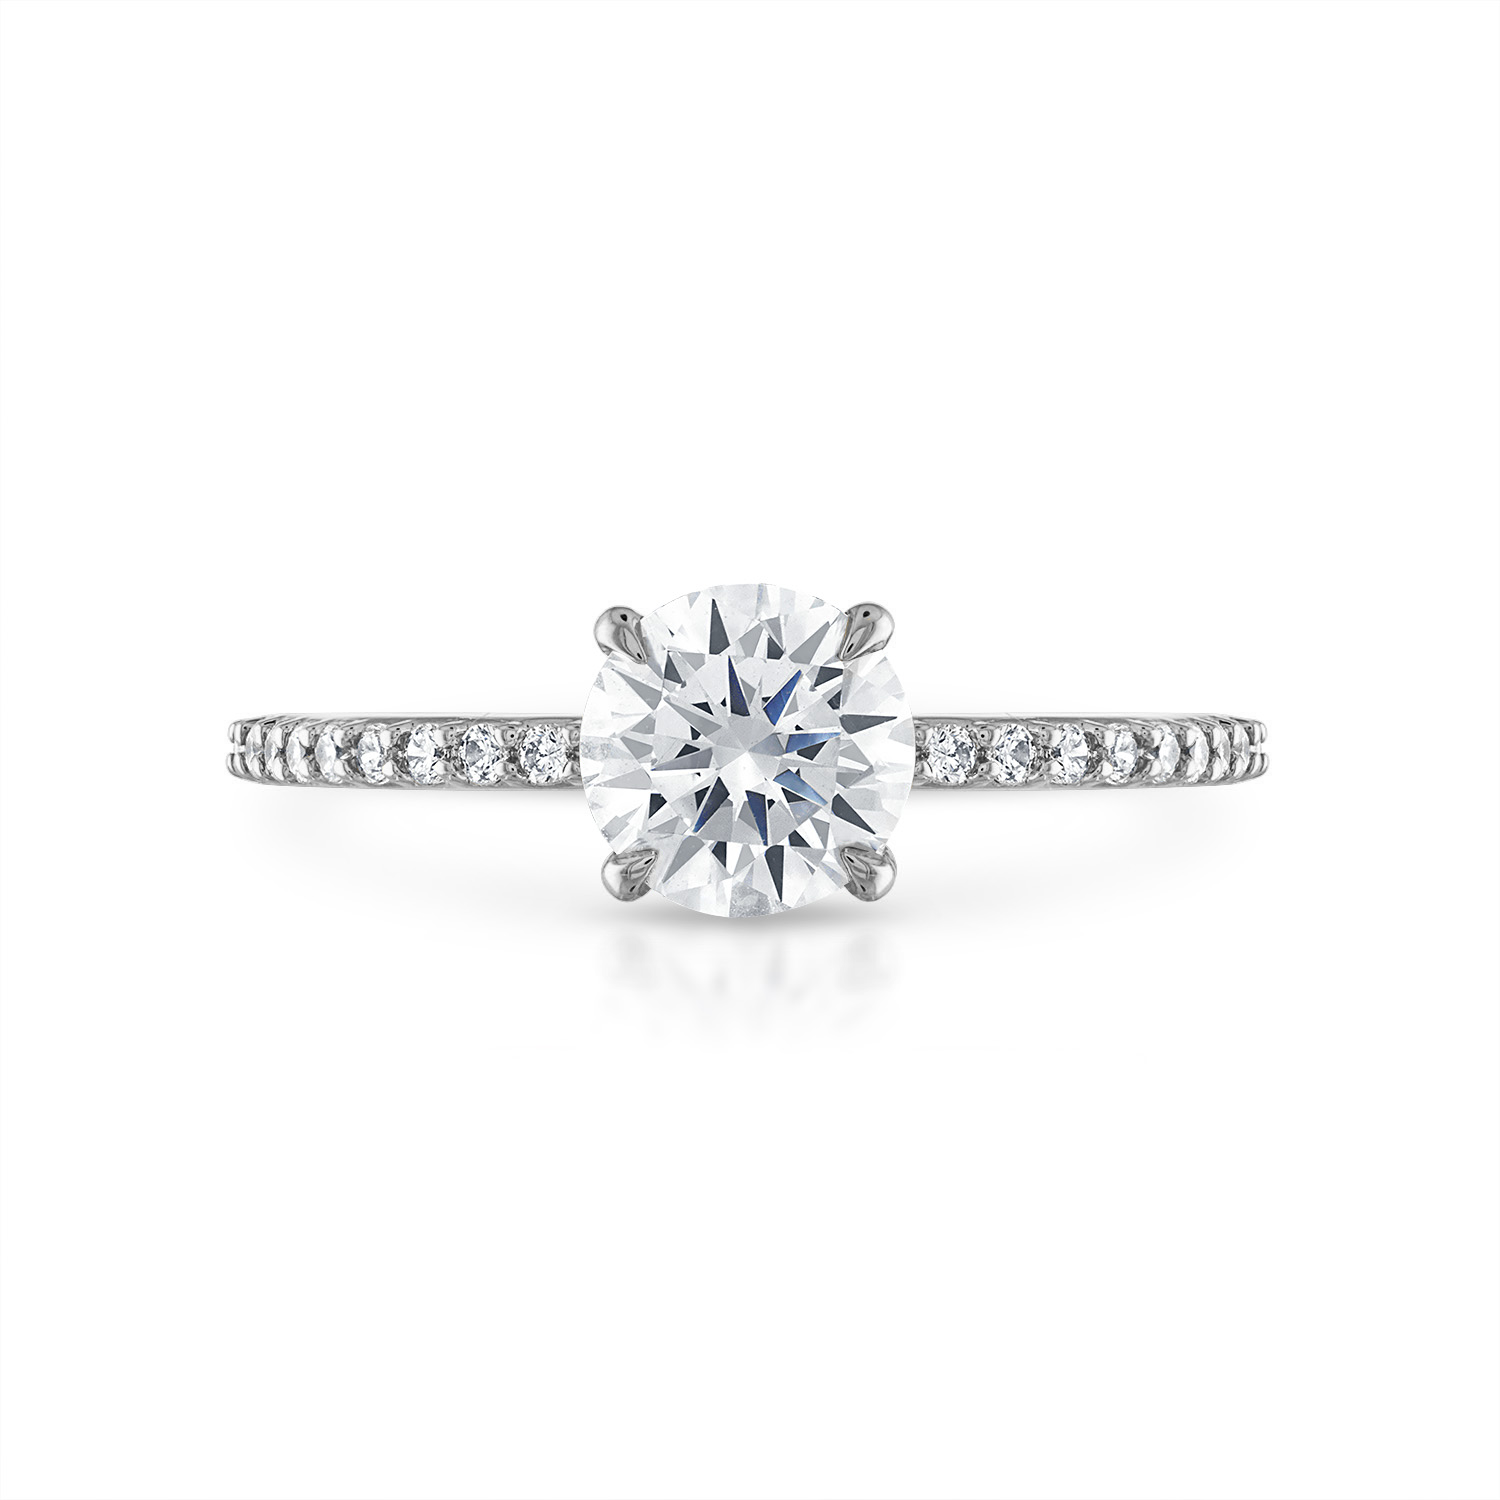 Round Pave with Pave Underbezel Engagement Ring in Platinum